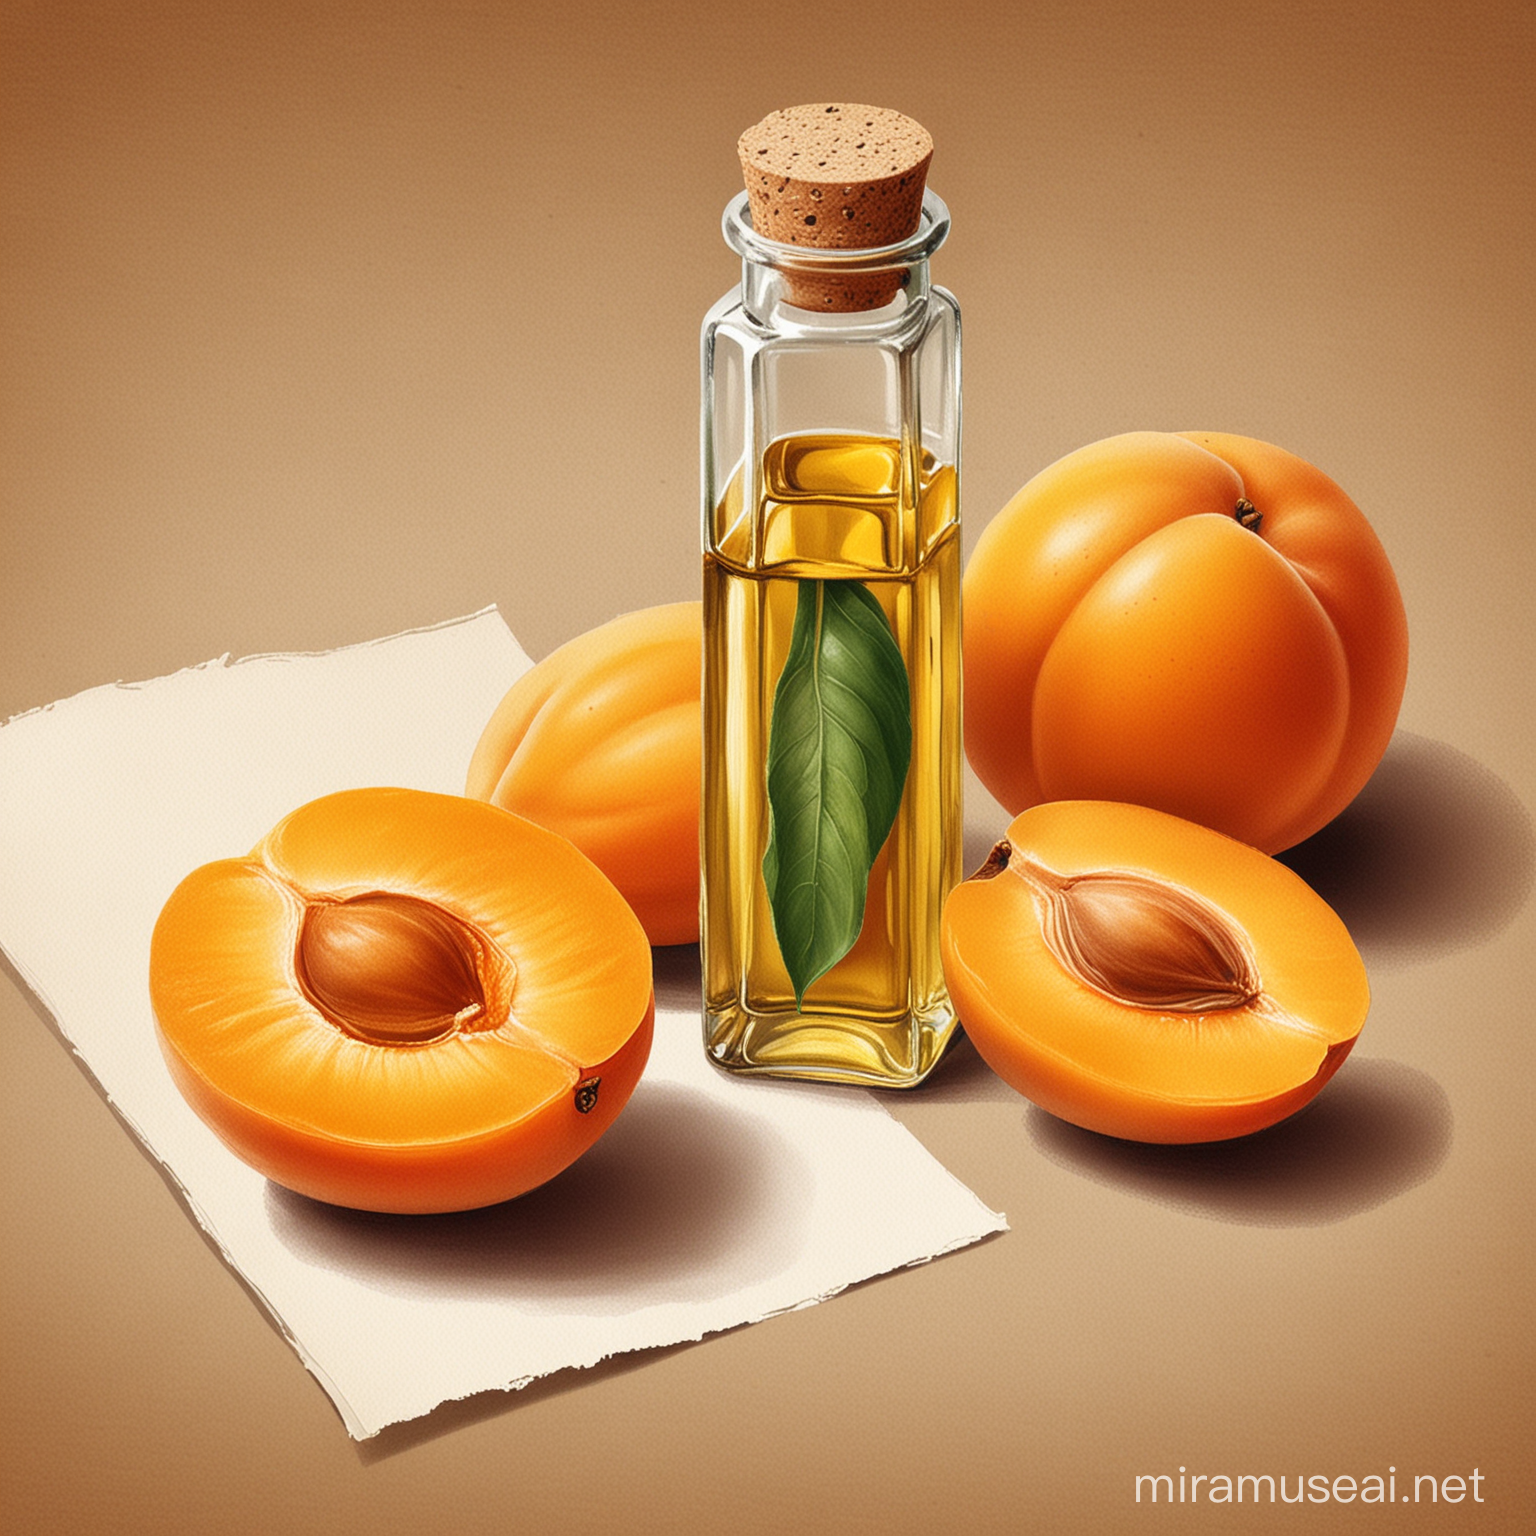 Draw an illustration sketch for the bottle of natural apricot oil. combine the apricot kernel oil,
  for example, the moment of obtaining oil from the kernel of an apricot, or squeezing oil from the kernel
